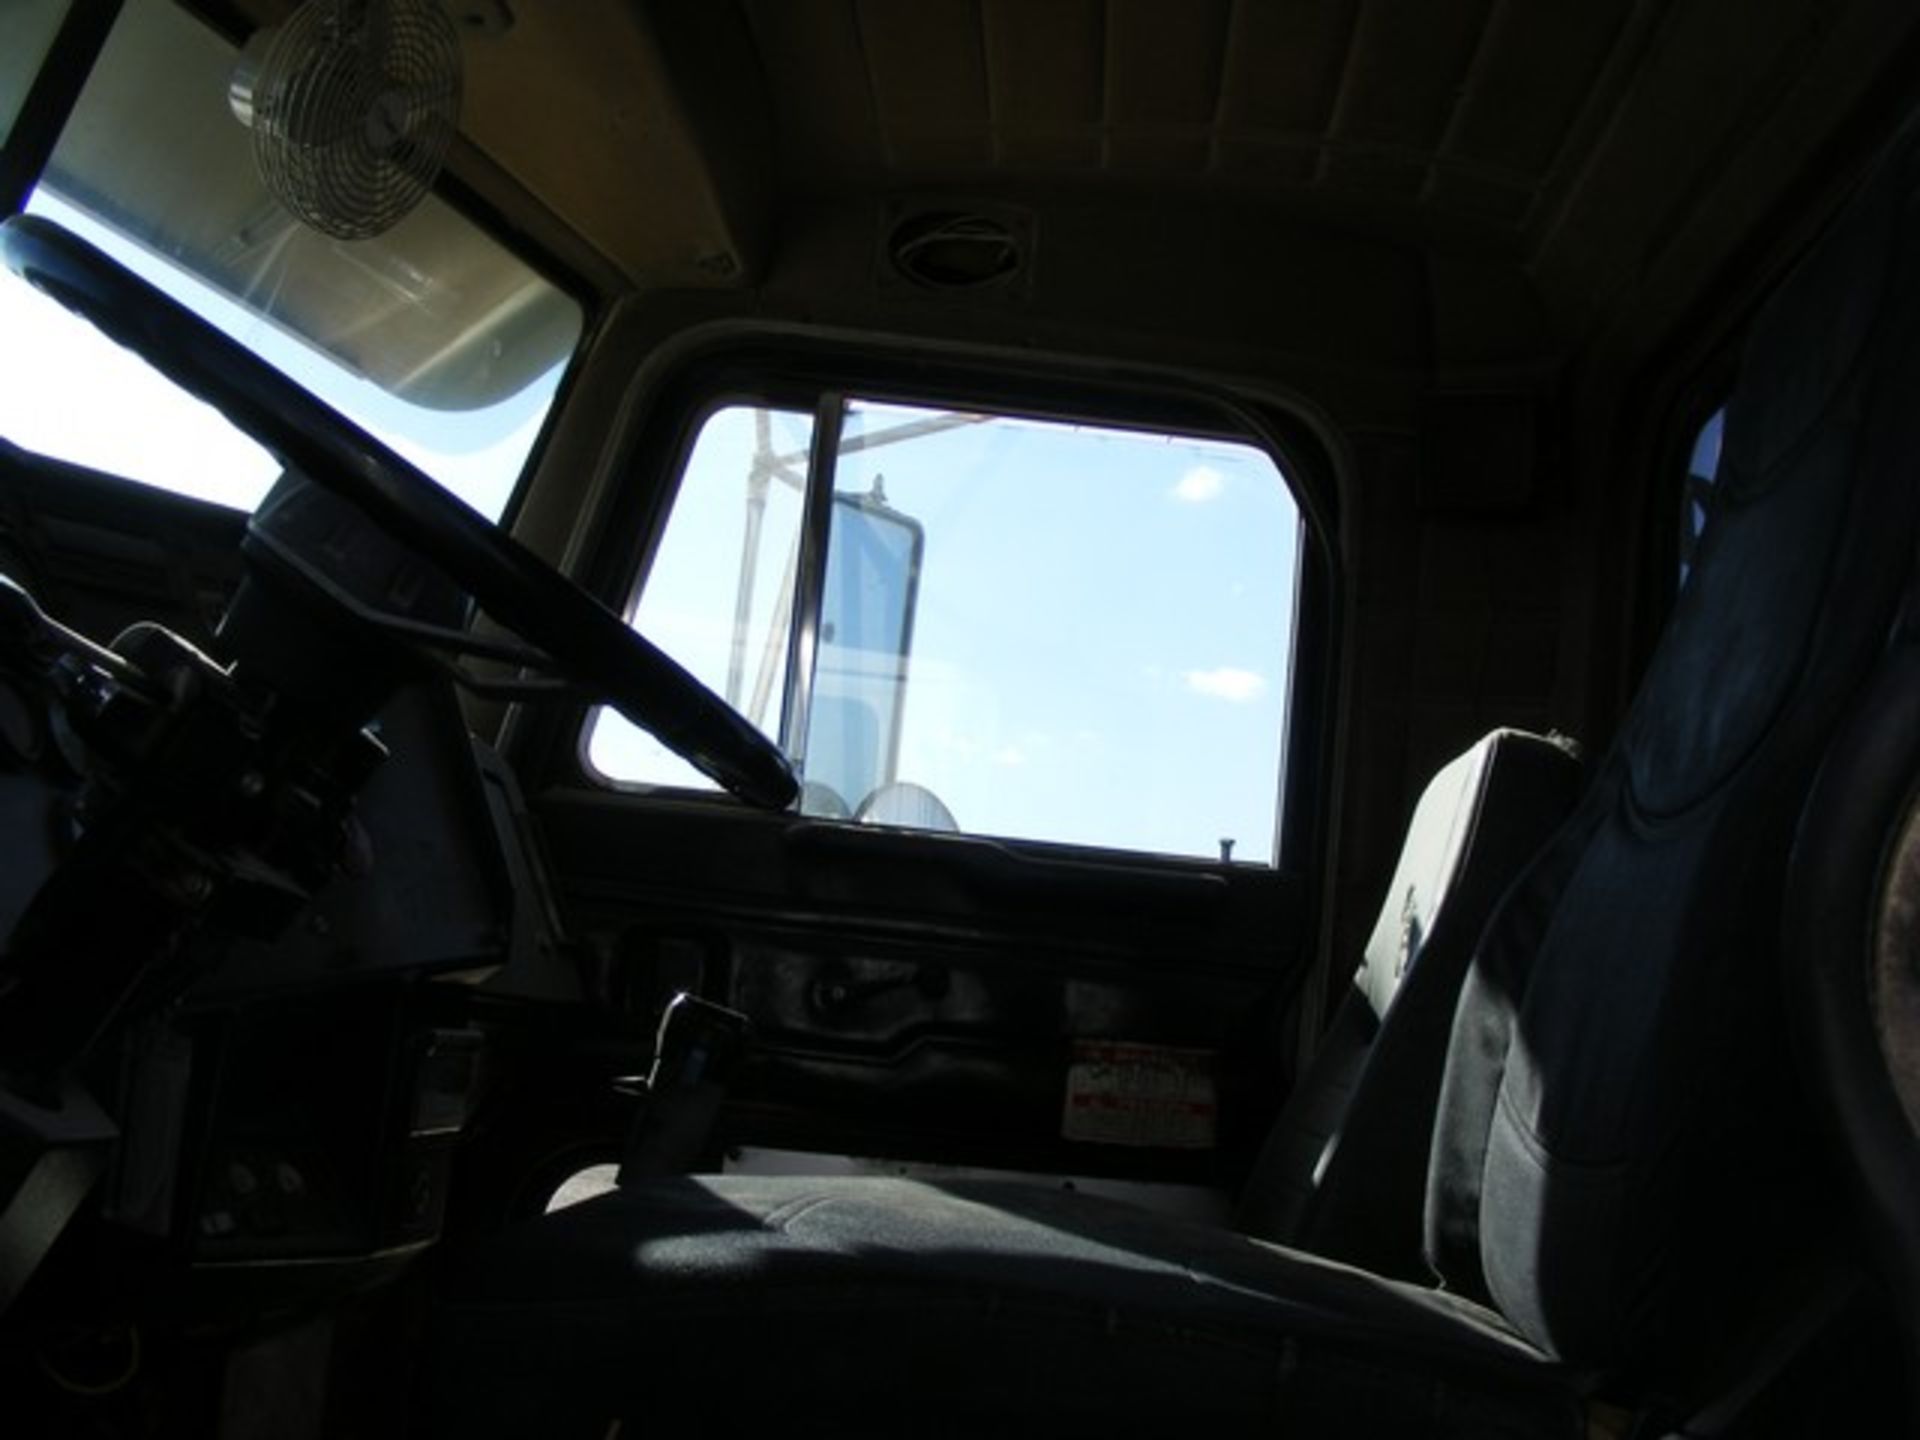 Located in YARD 1 - Midland, TX (6243) (X) 1996 PETERBILT 357 T/A GIN/ POLE TRUCK, VIN- - Image 6 of 8